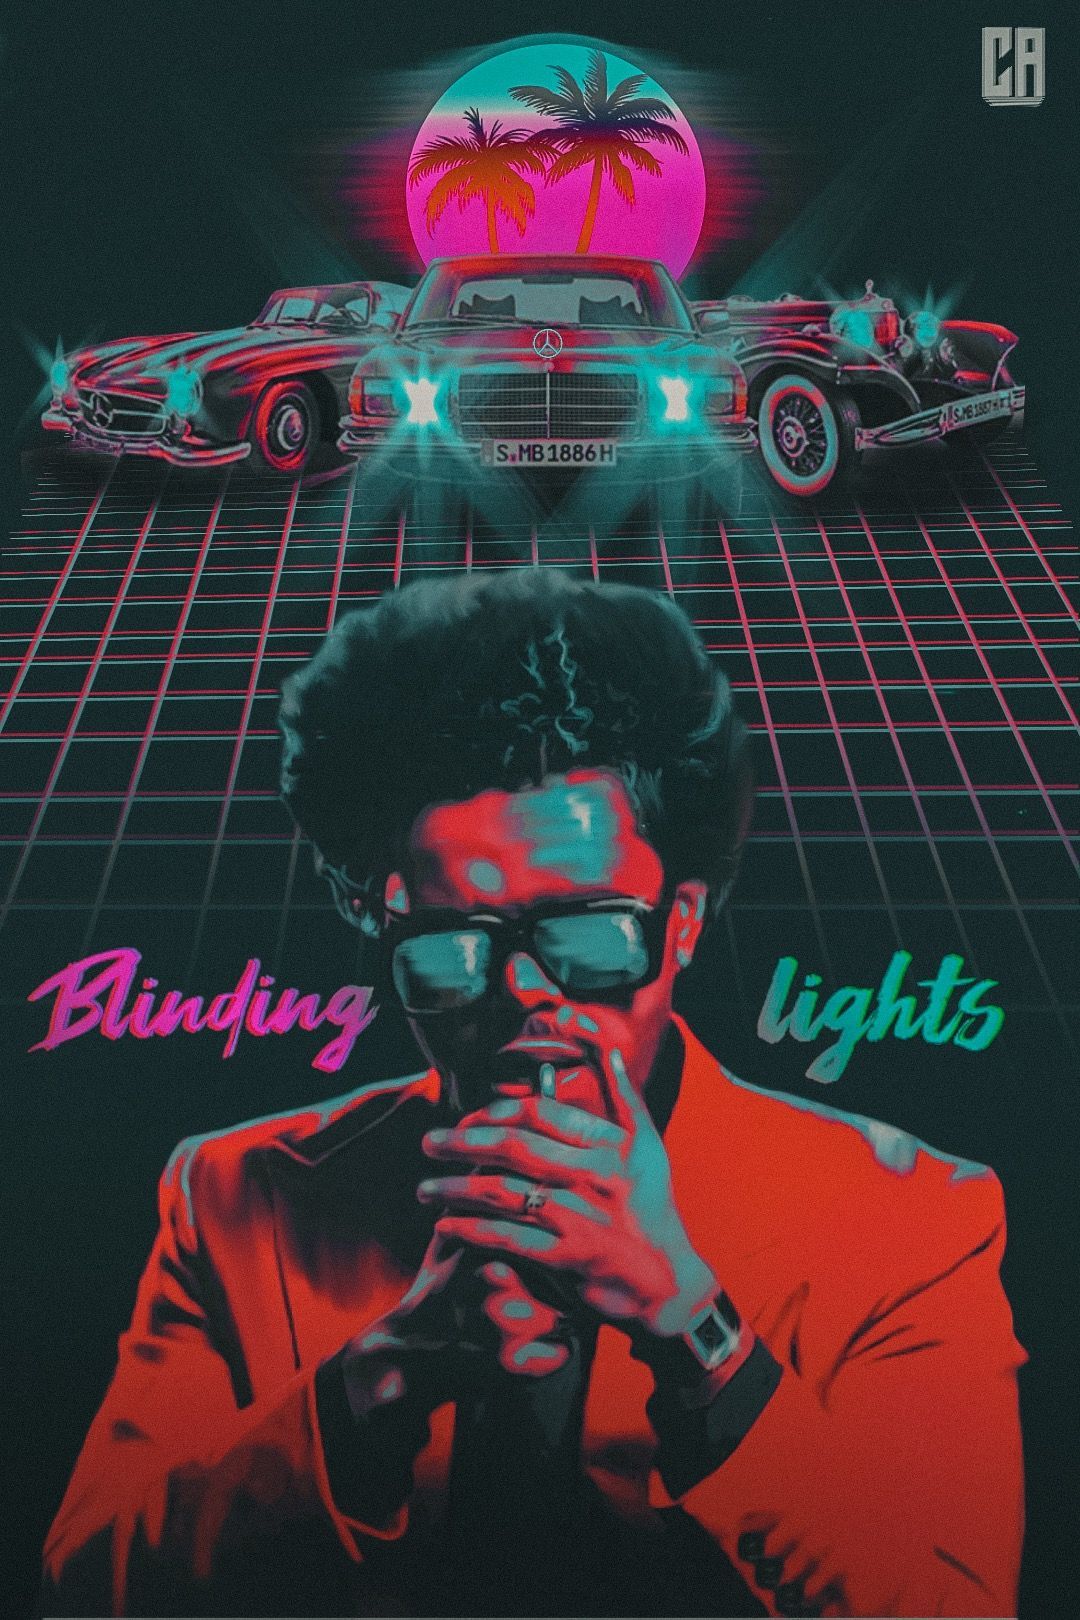 Blinding lights The Weeknd. The weeknd poster, The weeknd wallpaper iphone, The weeknd